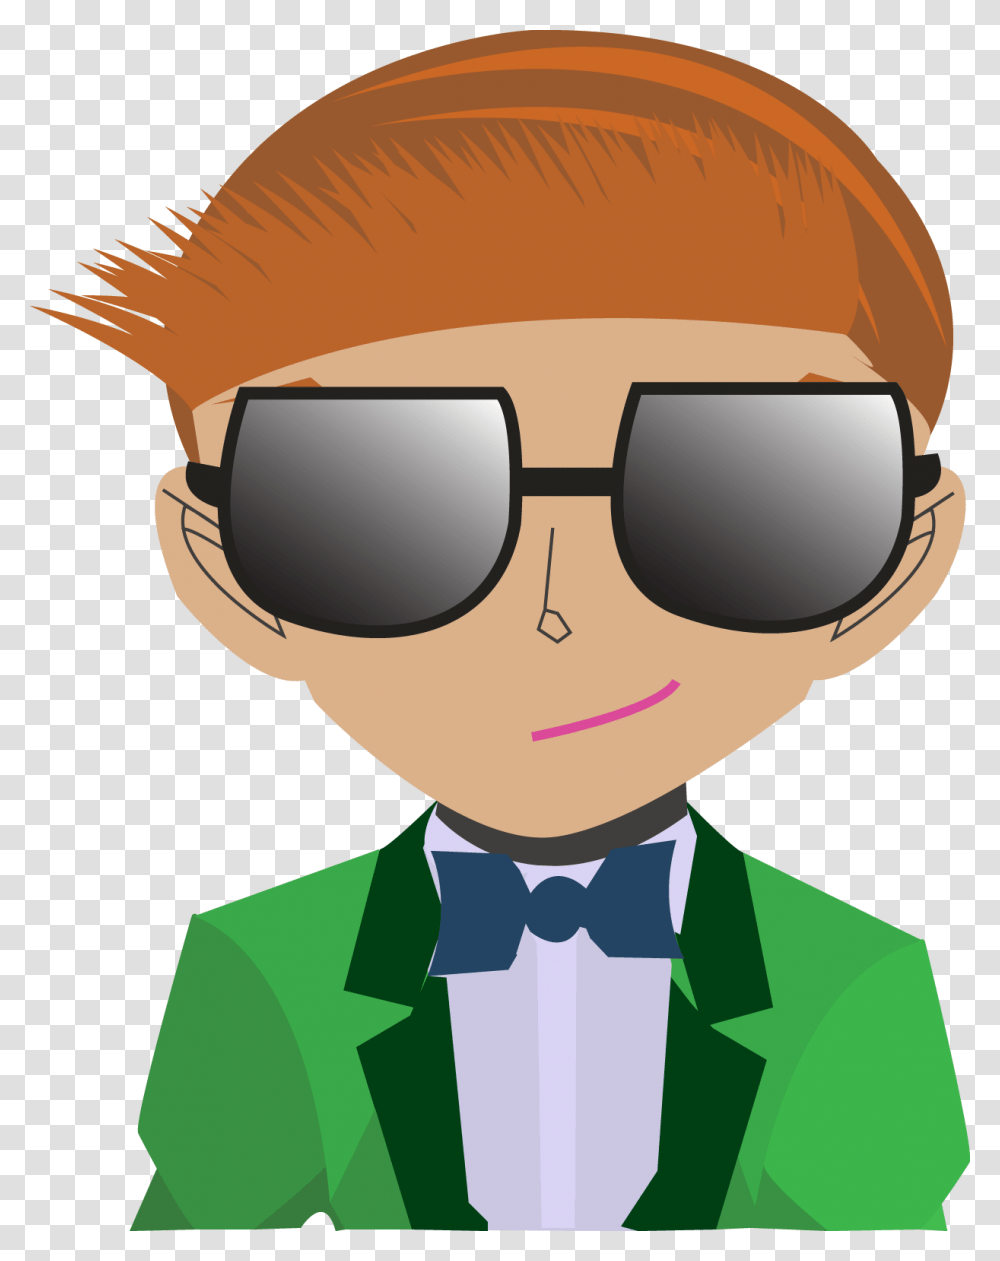 Evan Smiling While Wearing Sunglasses Wear Sunglasses Cartoon, Accessories, Accessory, Helmet Transparent Png